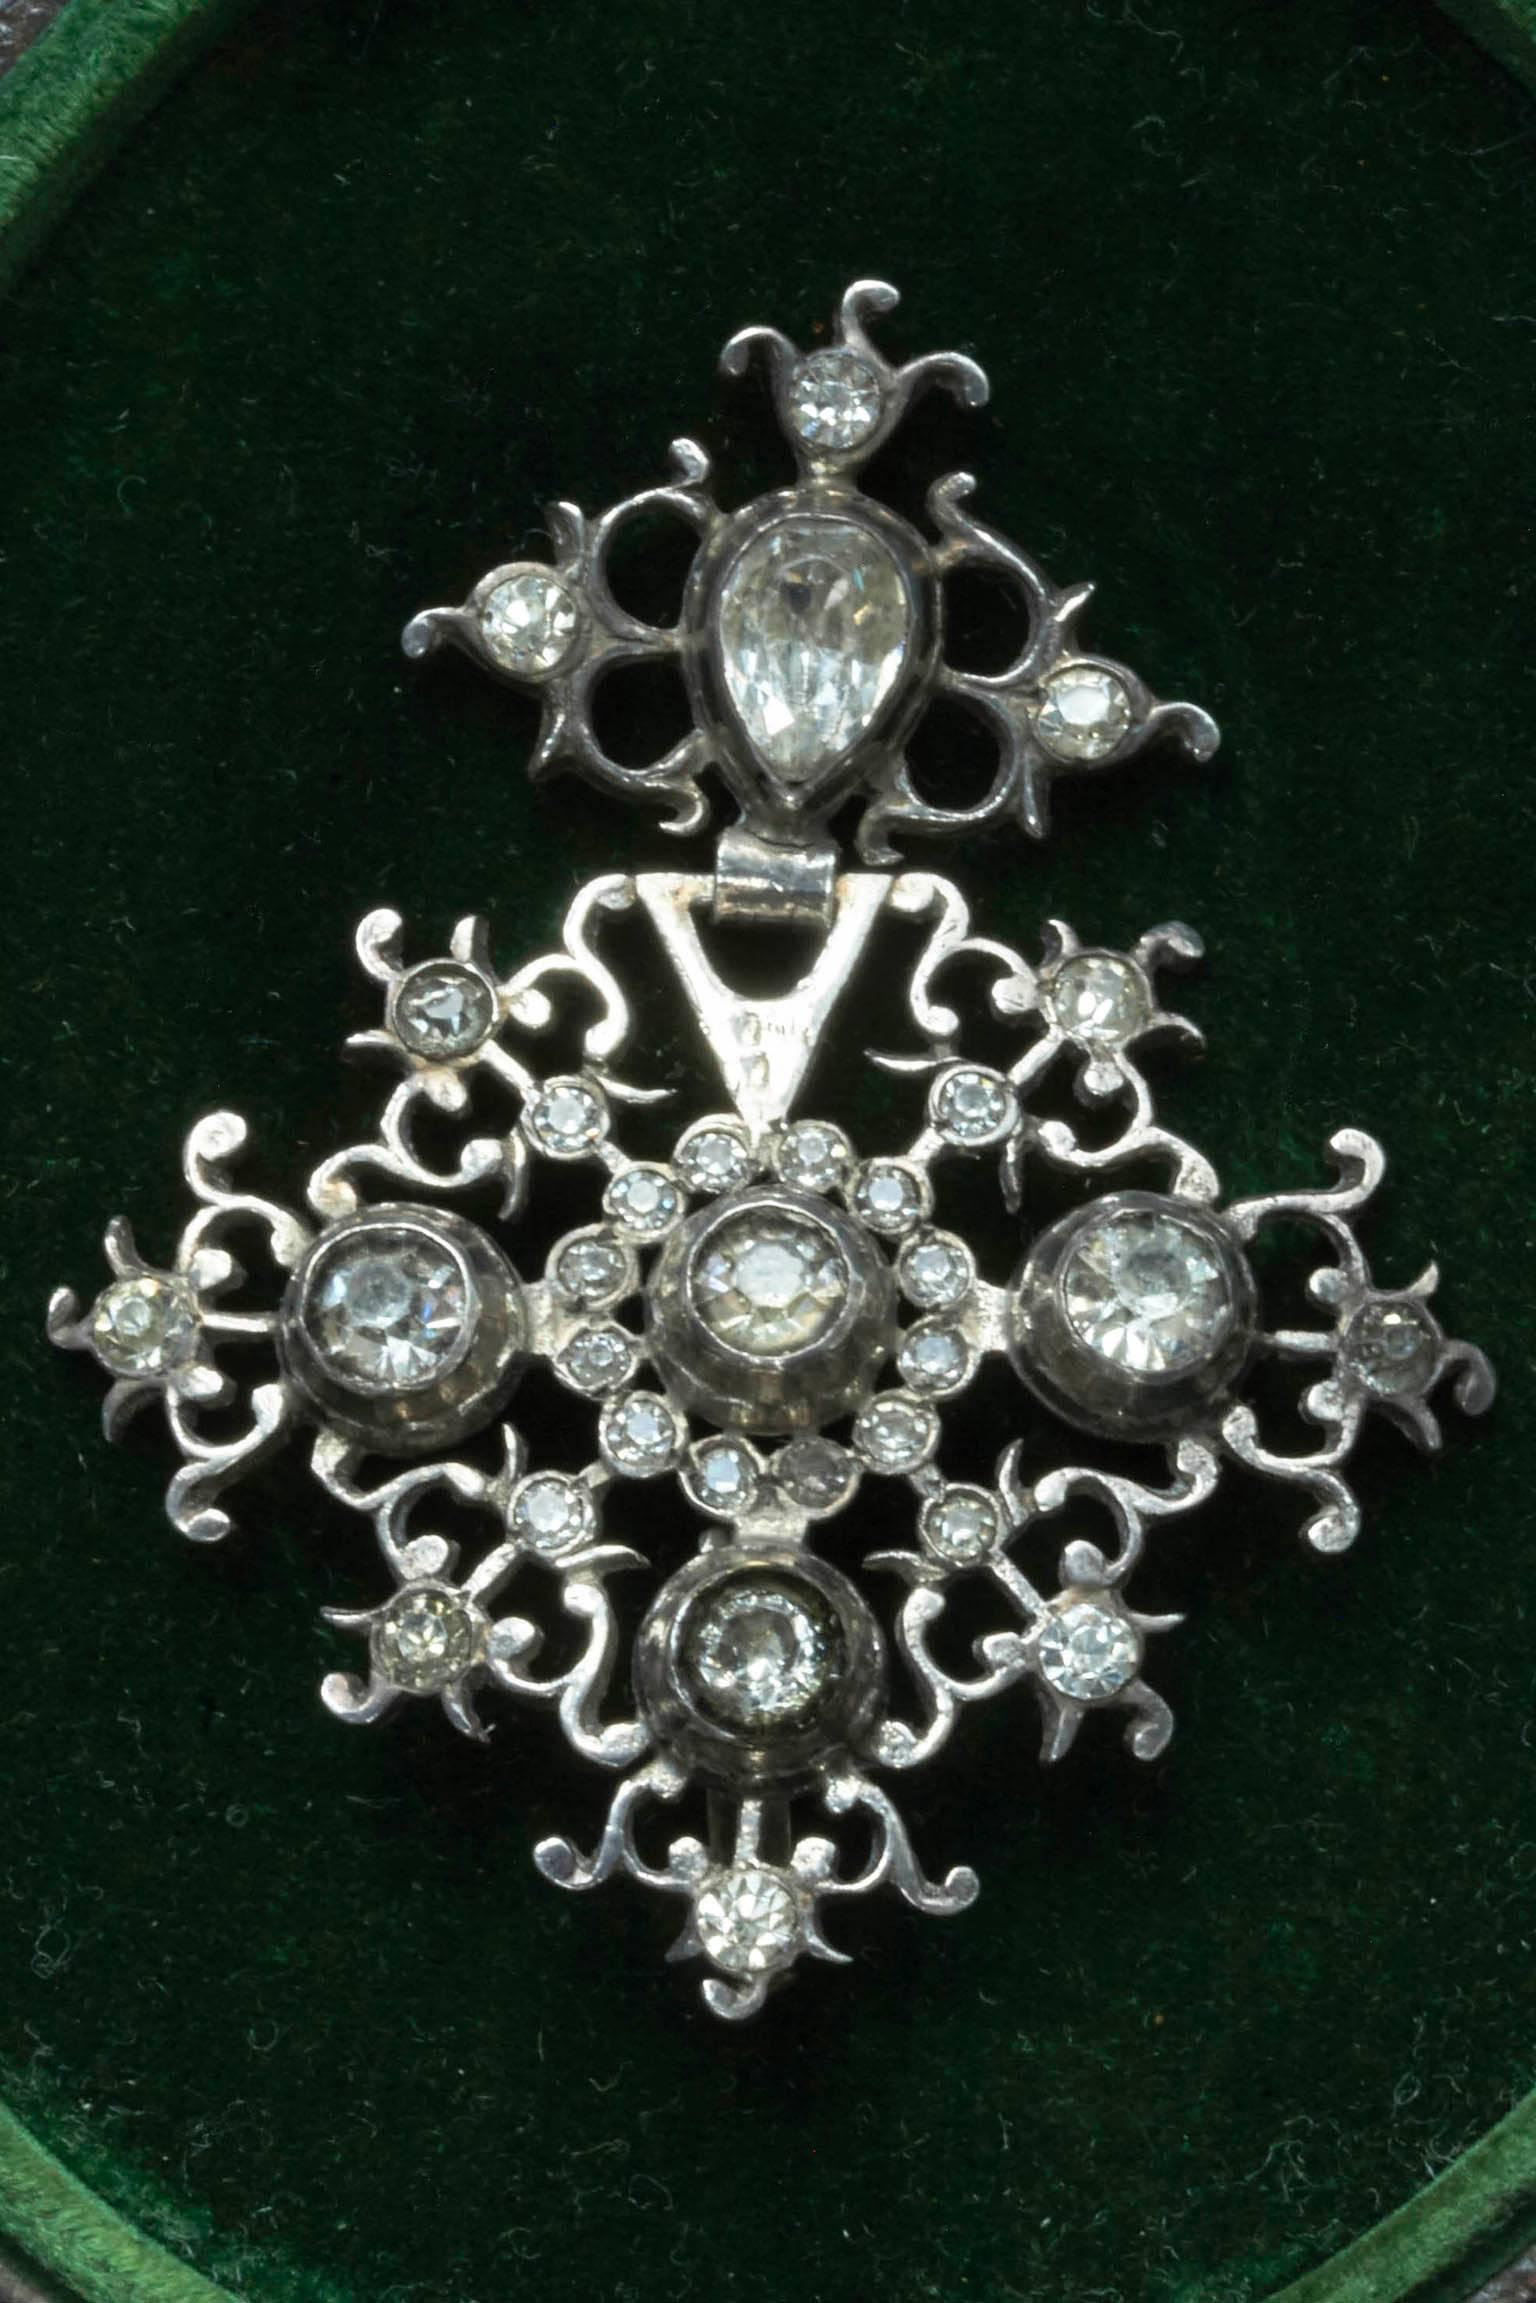 C.1800.  A Georgian silver and paste pendant. French in origin. The paste stones are foil-backed. There is a loop in the back to put through a ribbon for your neck. There is an illegible mark on the back of the pendant.
A very wearable piece with